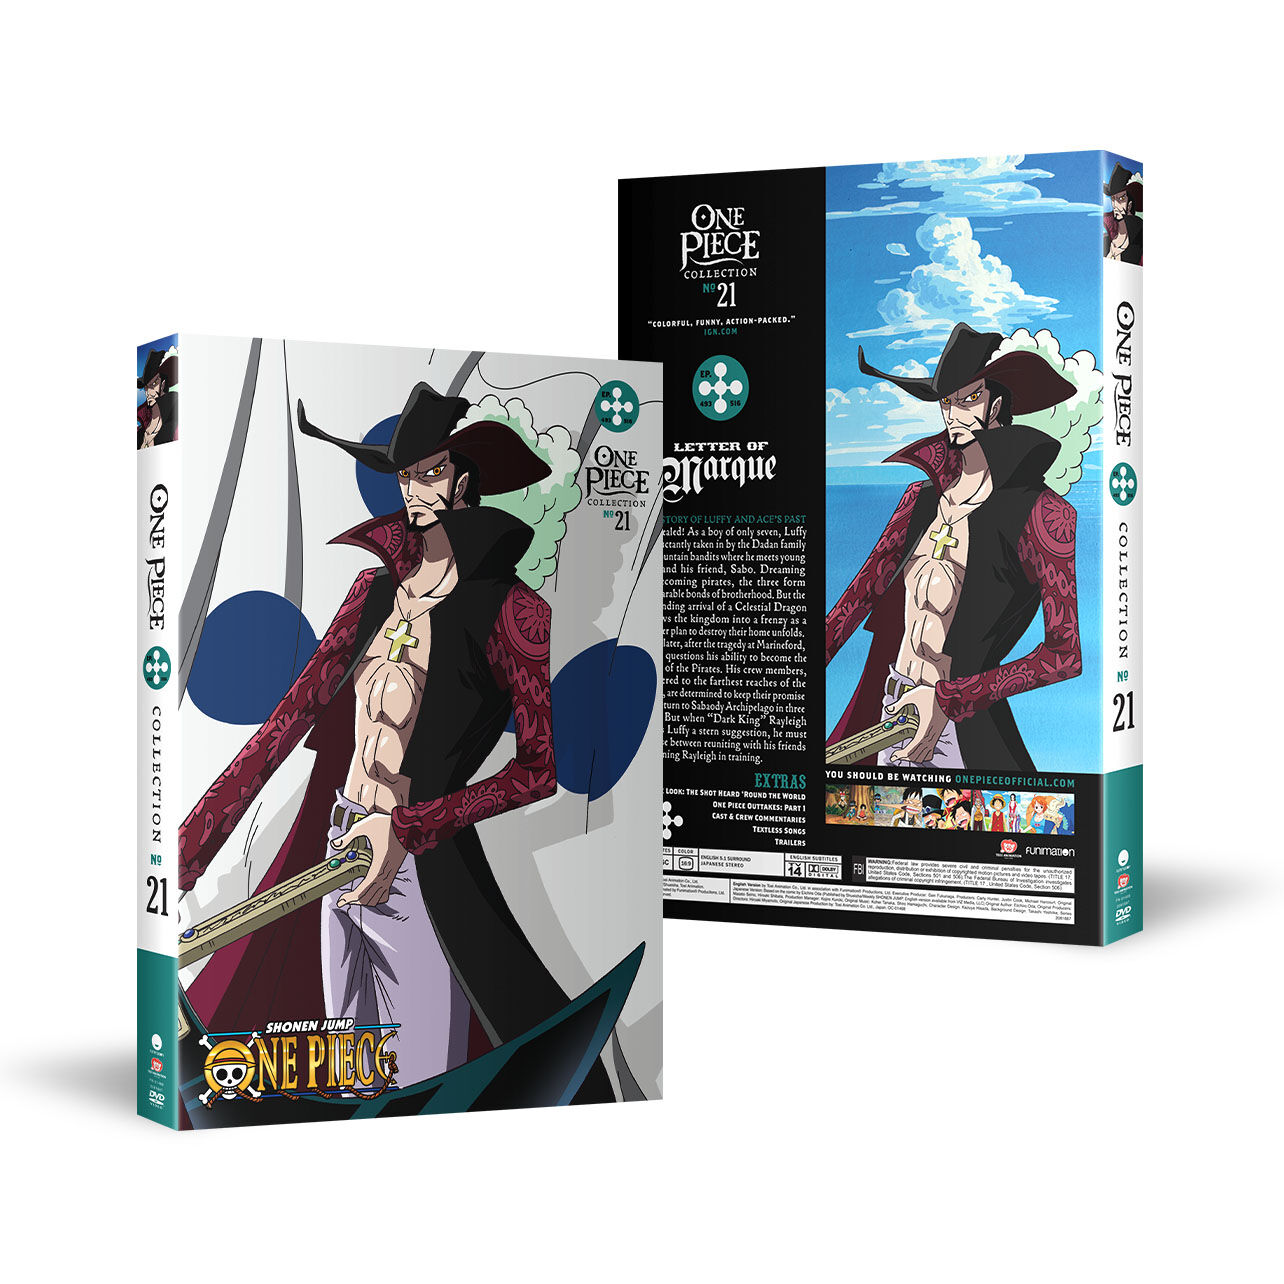 One Piece - Collection 21 - DVD | Crunchyroll Store